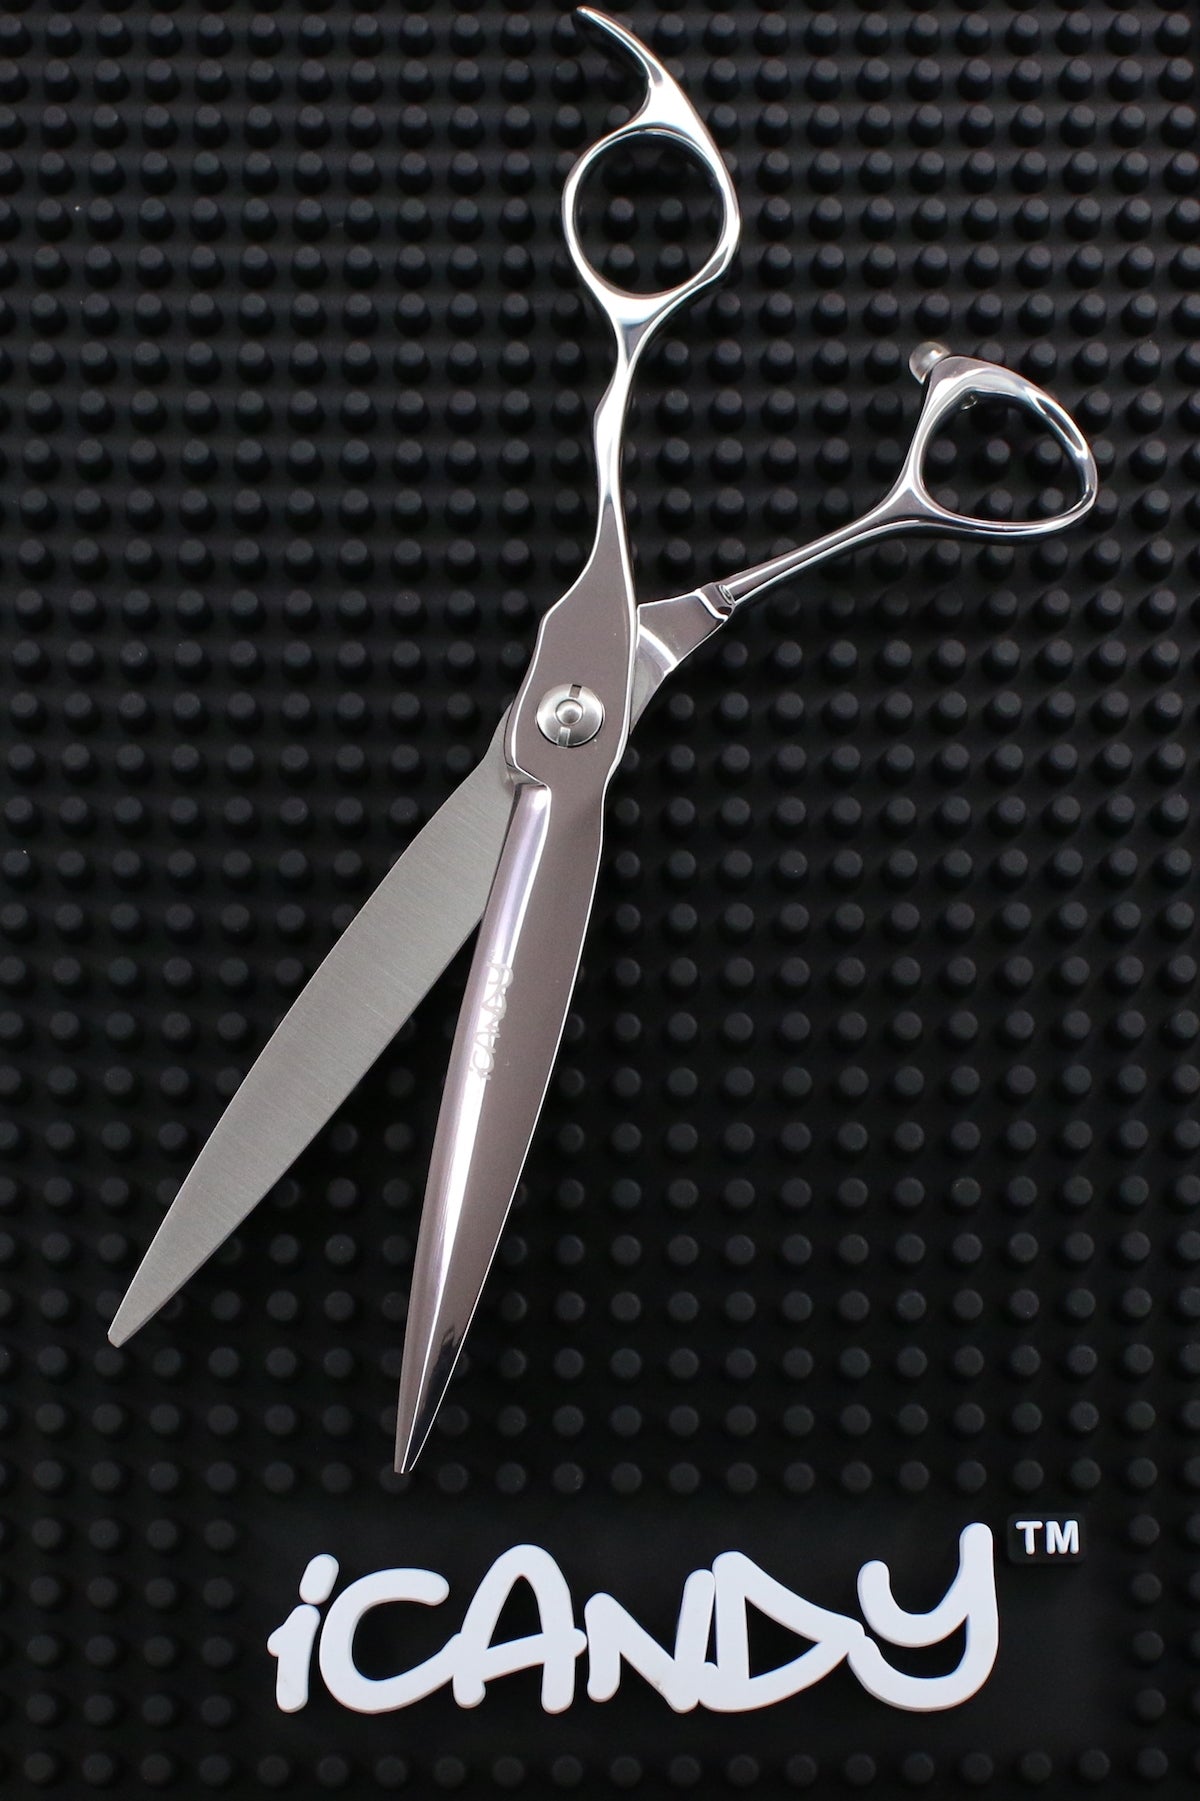 iCandy SLIDER VG10 Scissors (7.0 inch) Limited Edition! - iCandy Scissors